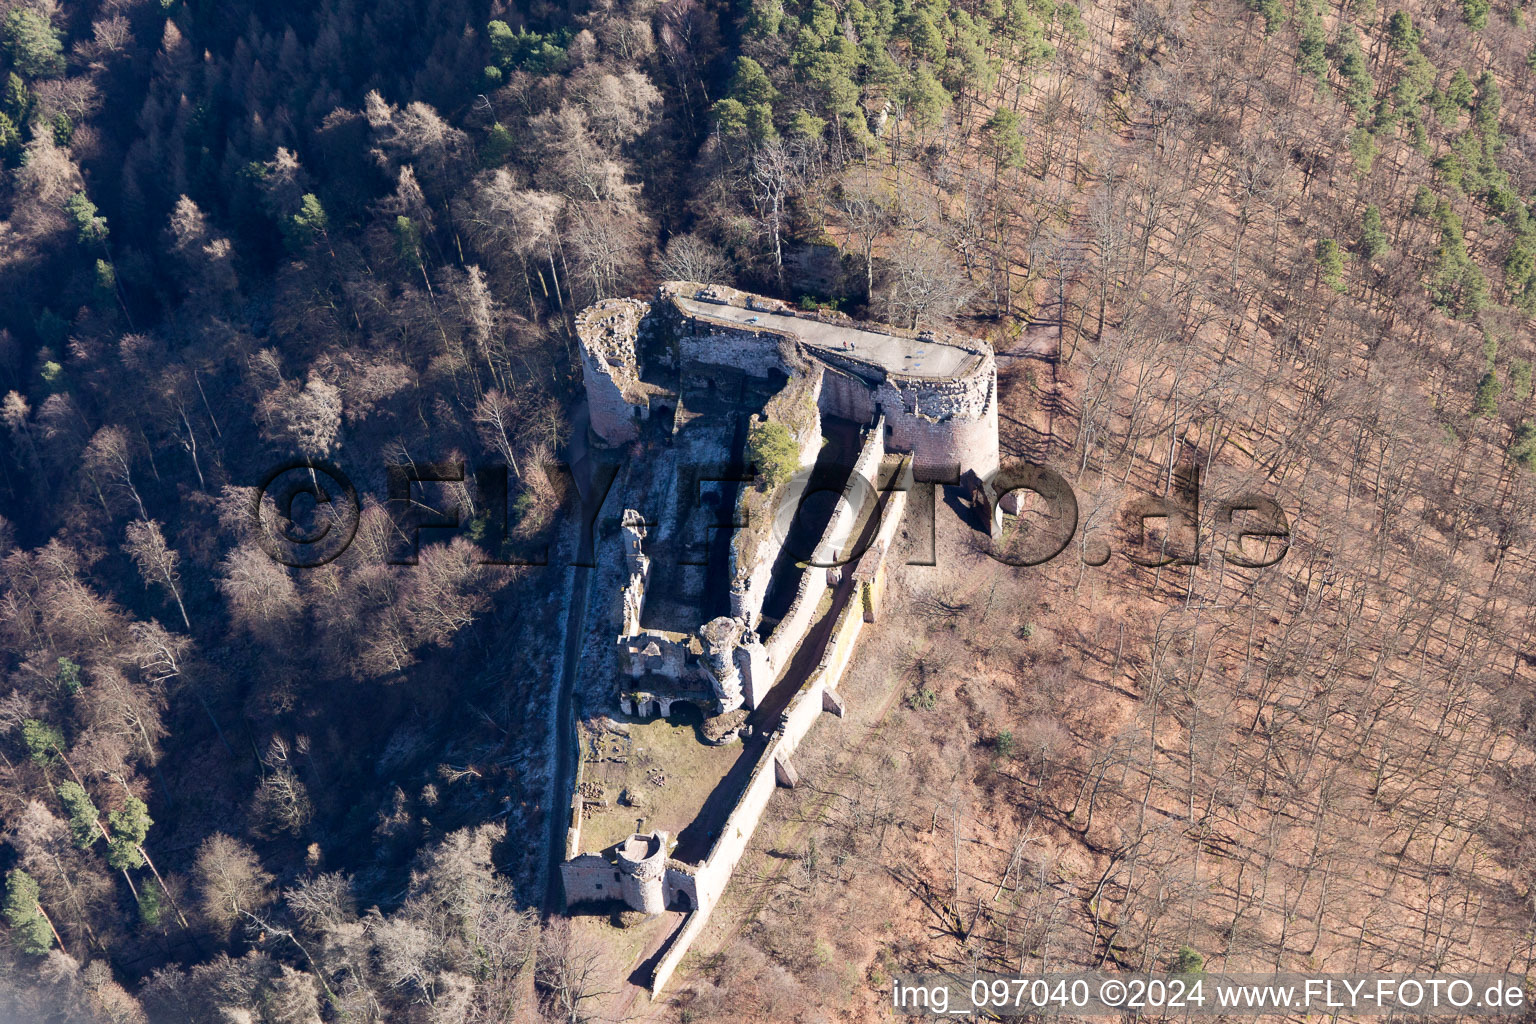 Aerial view of Ruins and vestiges of the former castle and fortress Burg Neuscharfeneck in Ramberg in the state Rhineland-Palatinate